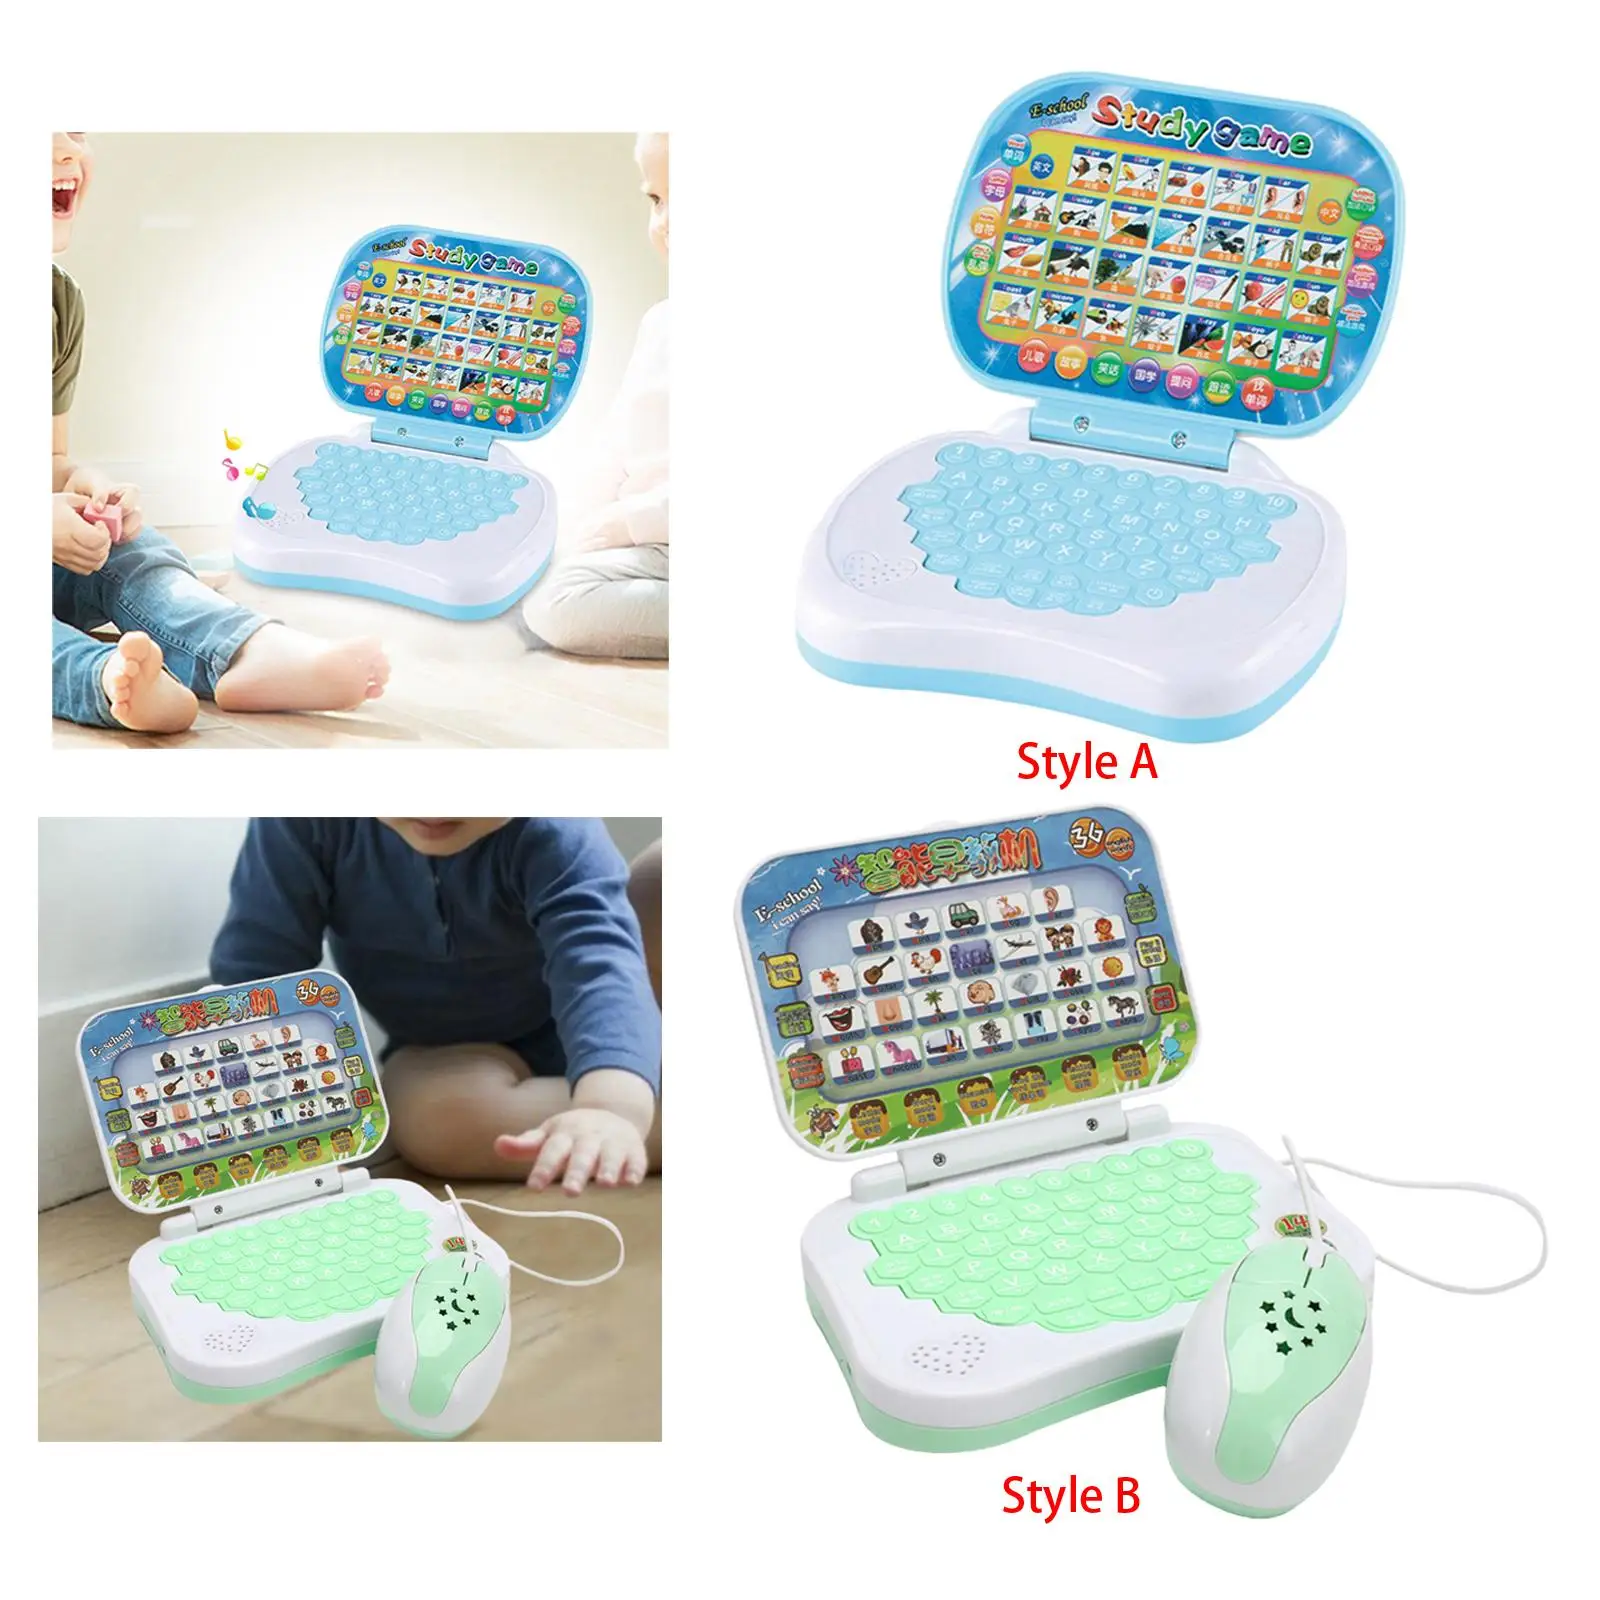 Handheld Language Learning Machine Activities Child Interactive Learning Pad Tablet for Toddler Girls Boys Children Kids